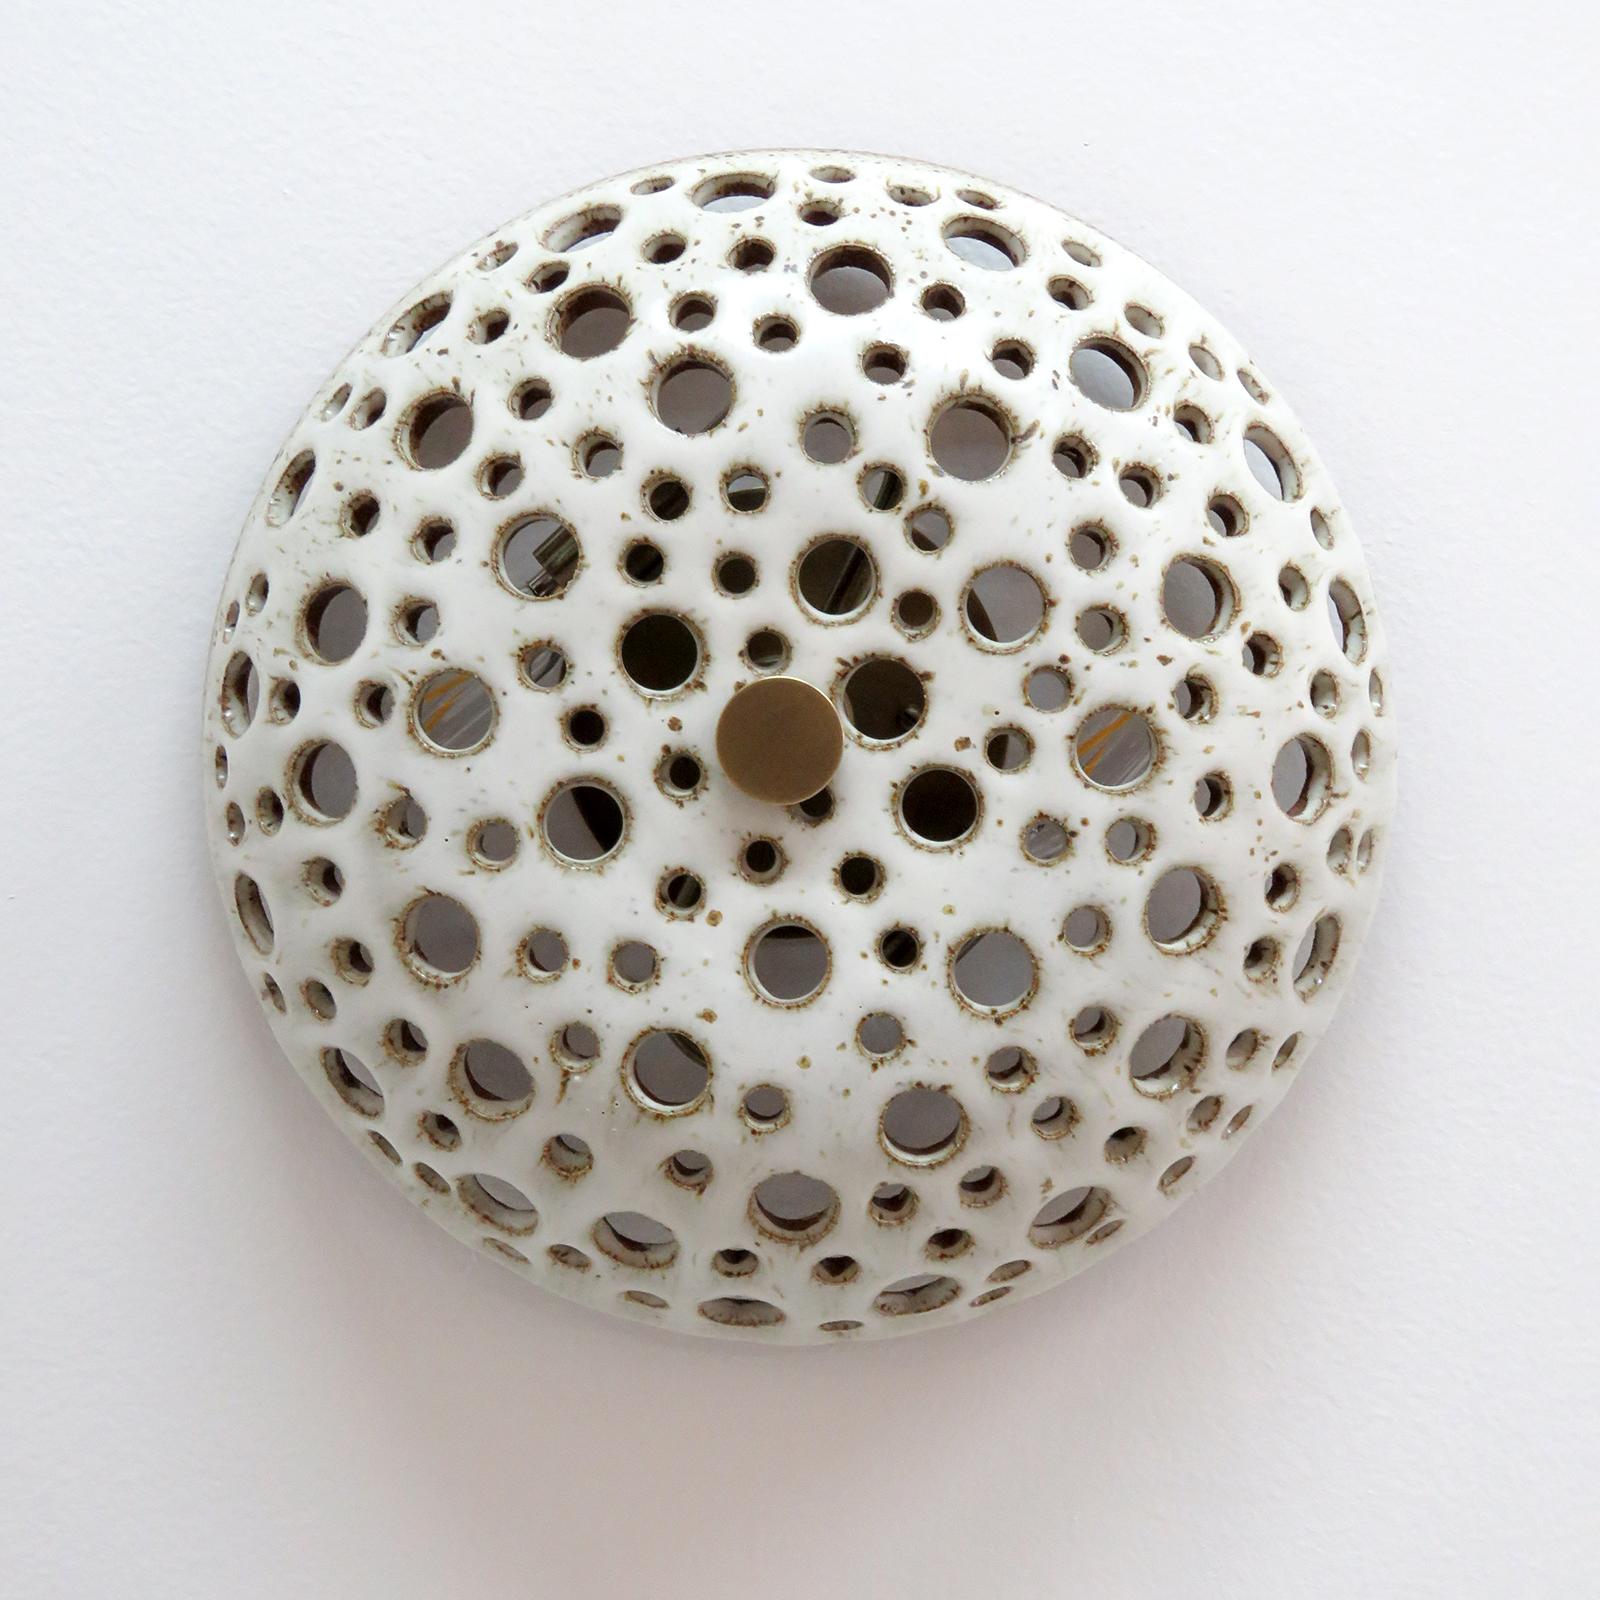 Stunning ceramic light No.9, designed and handcrafted by Los Angeles based ceramicist Heather Levine. High fired stoneware with matte white glaze on a cork colored clay body with decorative perforations to expose light in patterns on nearby